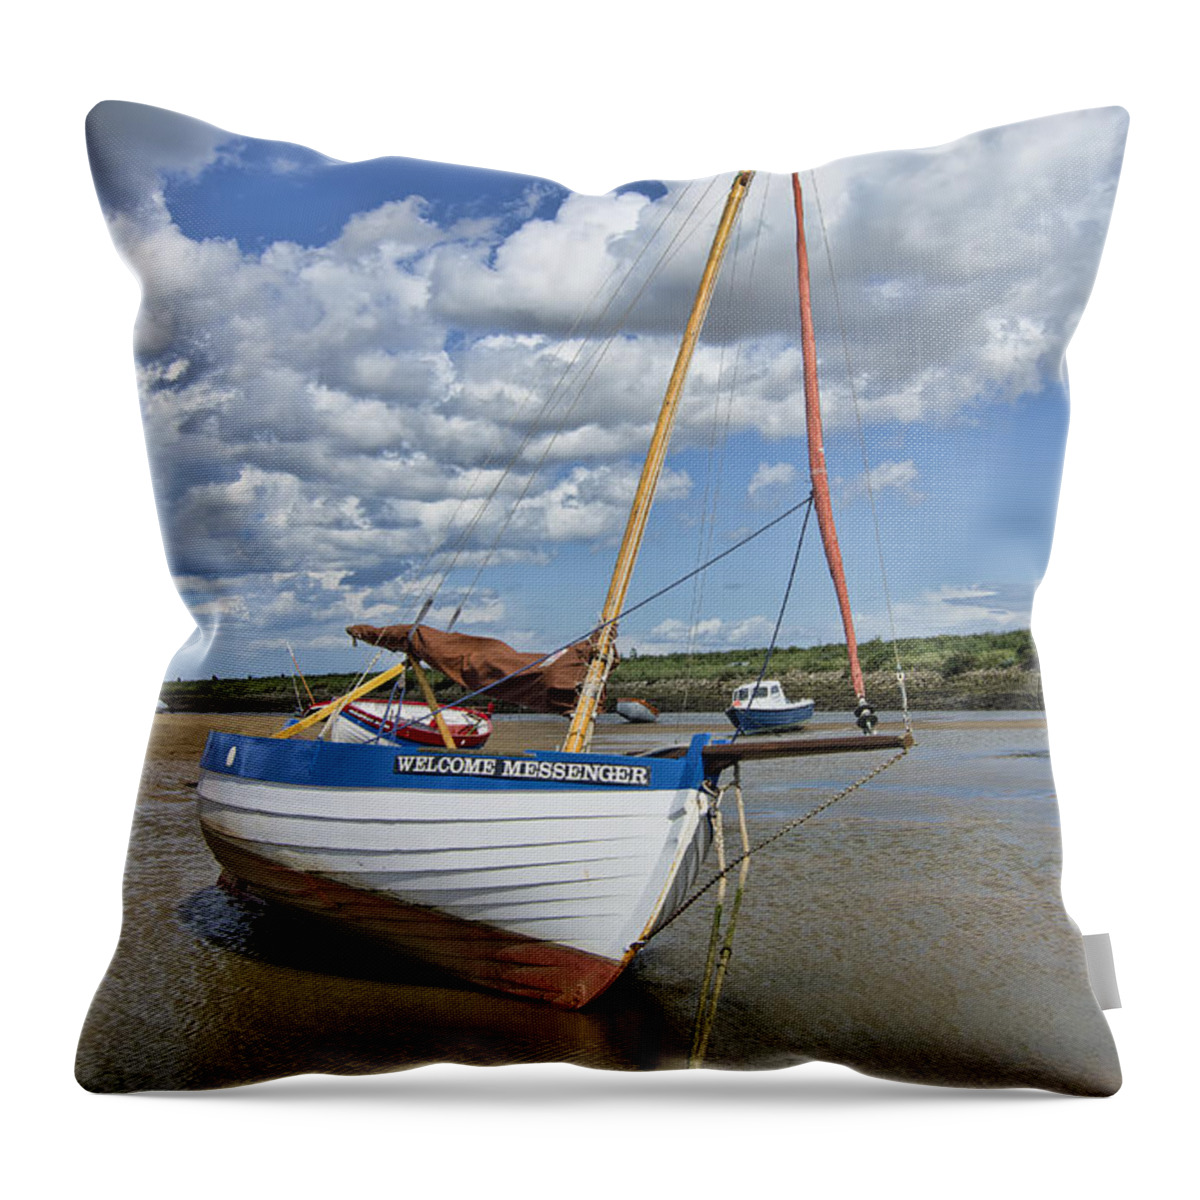 Welcome Messenger Throw Pillow featuring the photograph Burnham Staithe Welcome Messenger by Steev Stamford